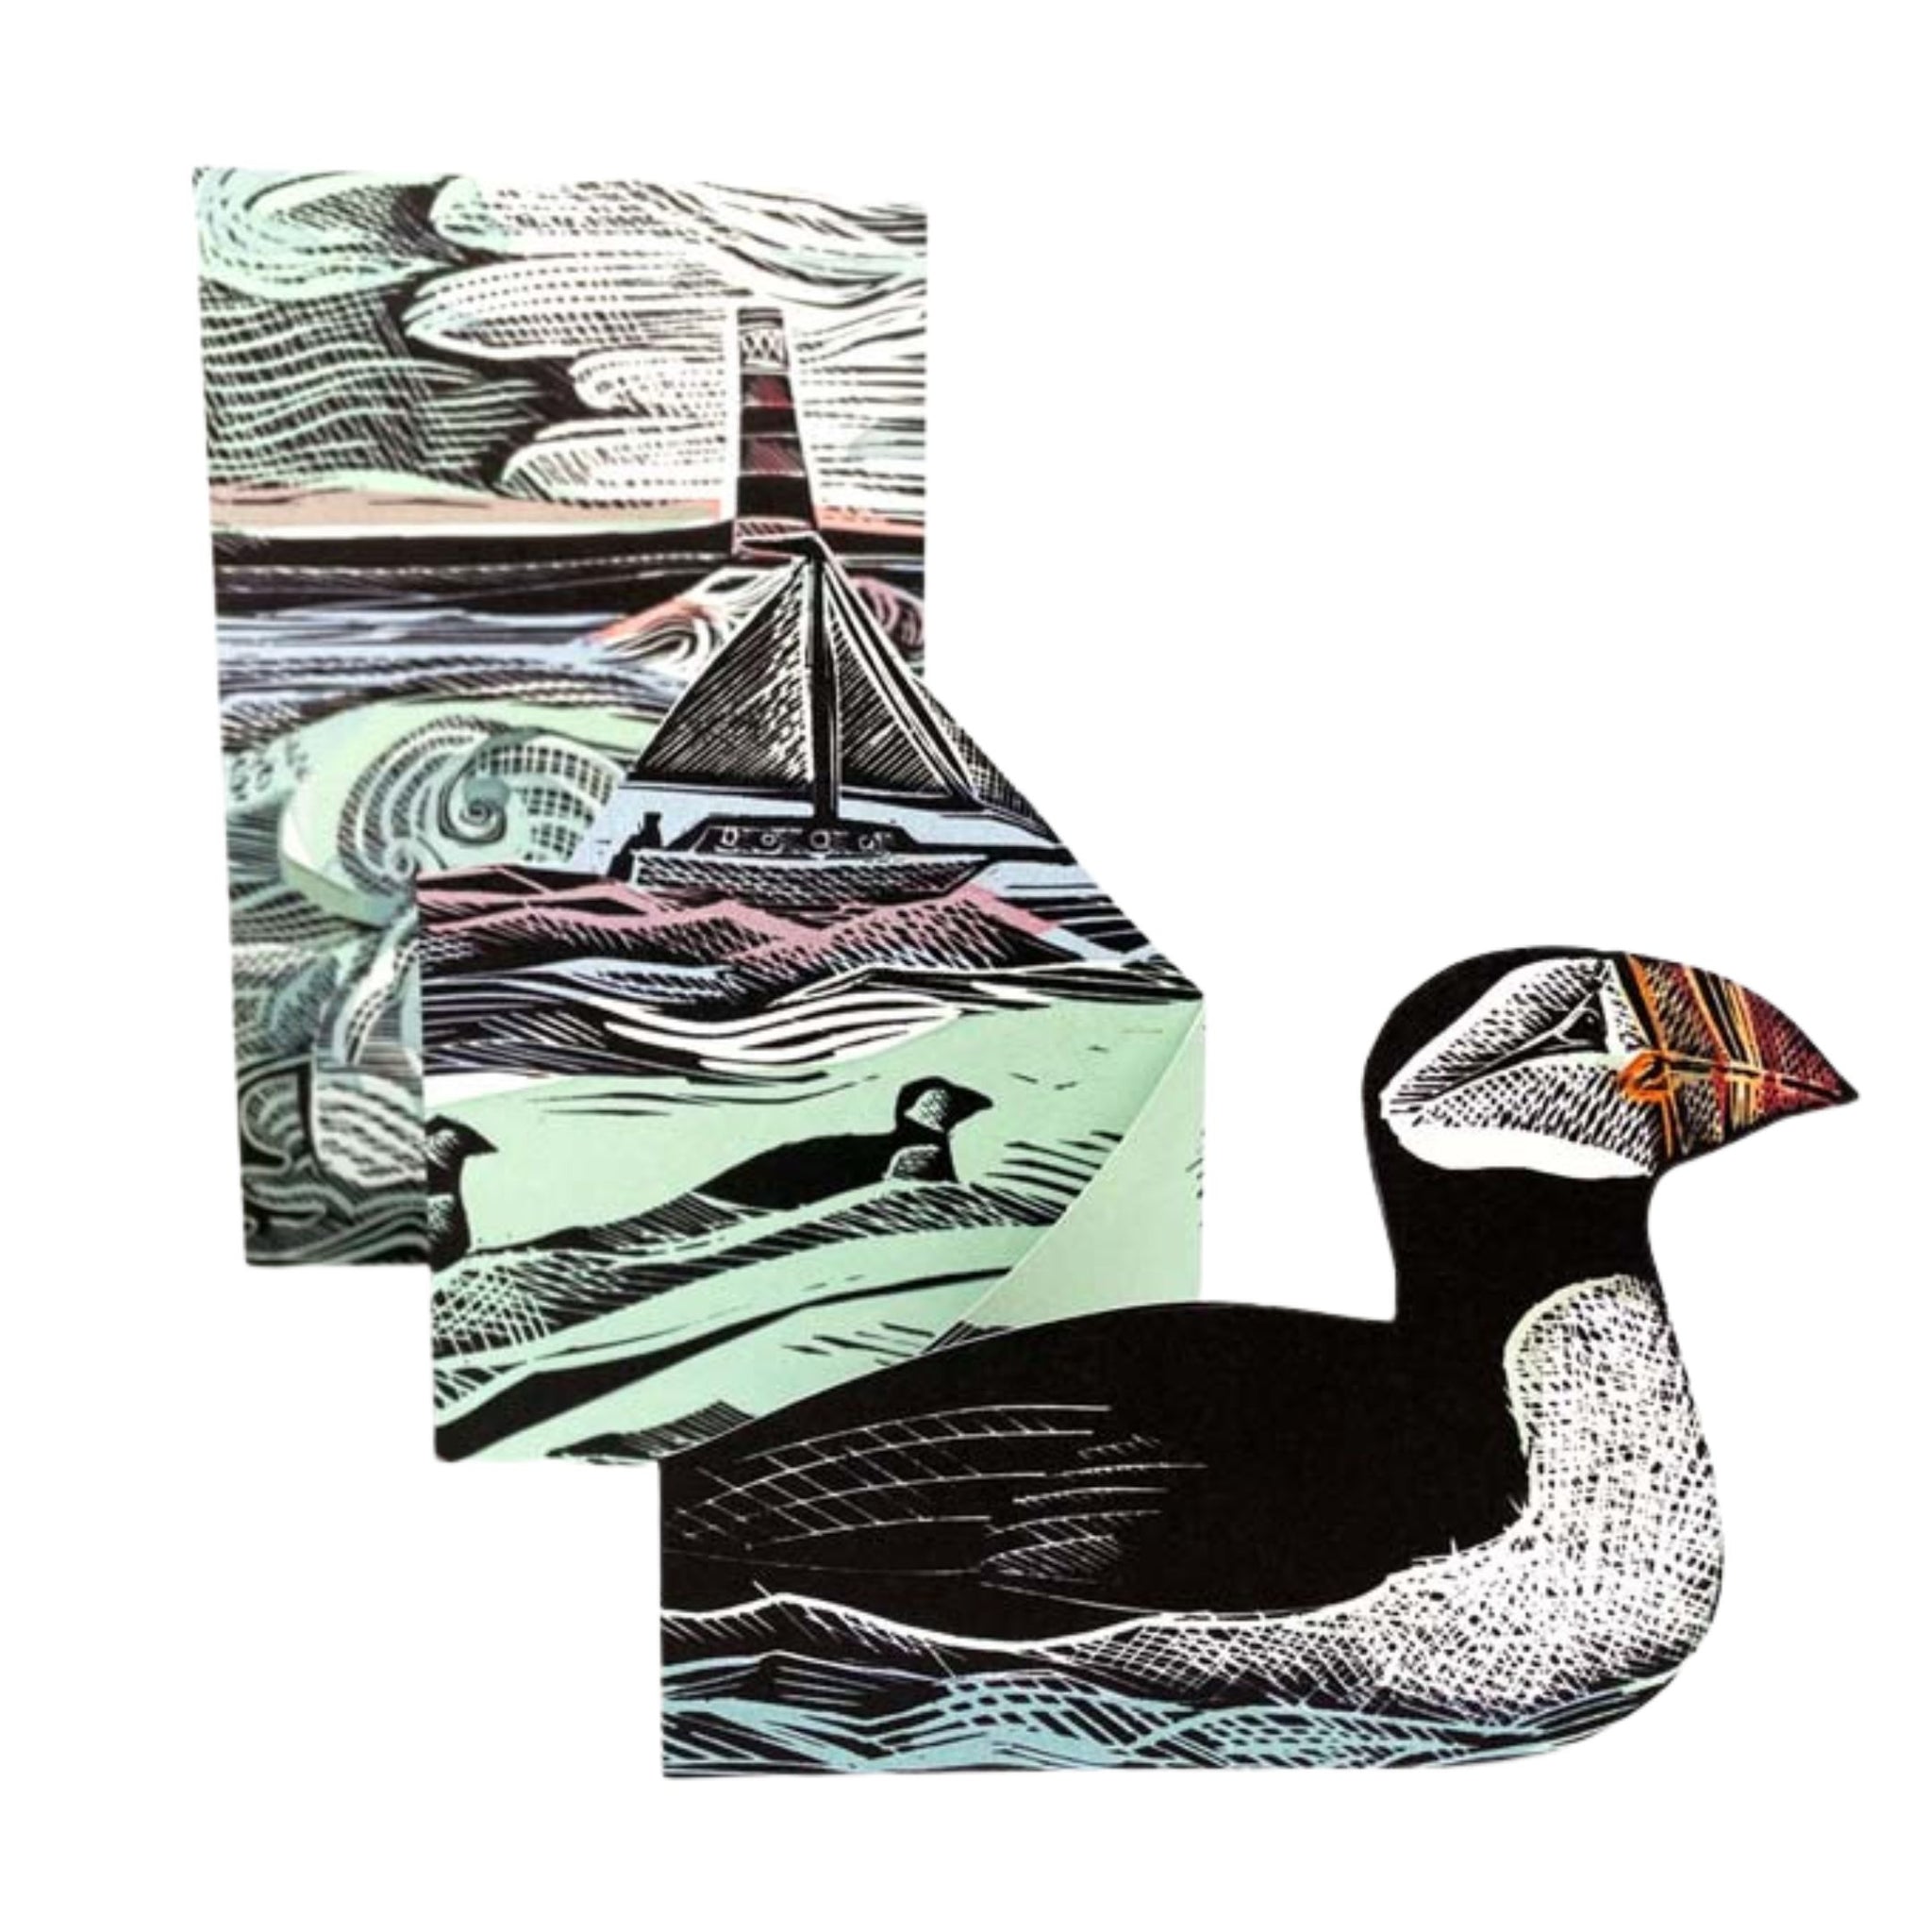 Puffins at Coquet Island by Angela Harding. Folding out to create a lovely rural scene.